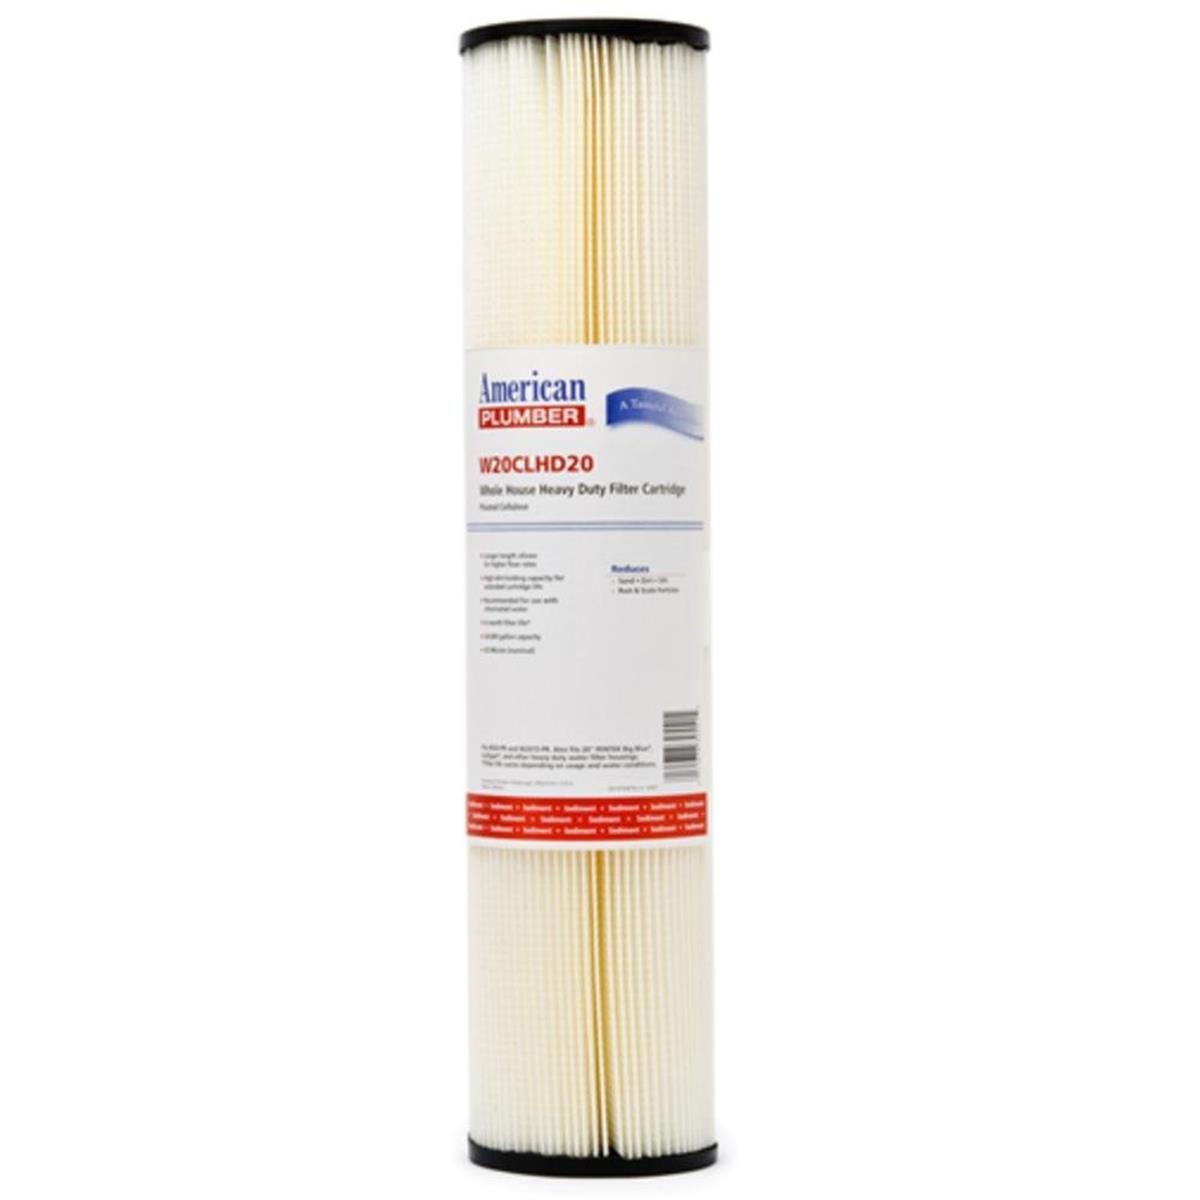 Picture of Commercial Water Distributing AMERICAN-PLUMBER-W20CLHD20 Pleated Cellulose Whole House Heavy Duty Filter Cartridge, 20 Micron - 20 in.